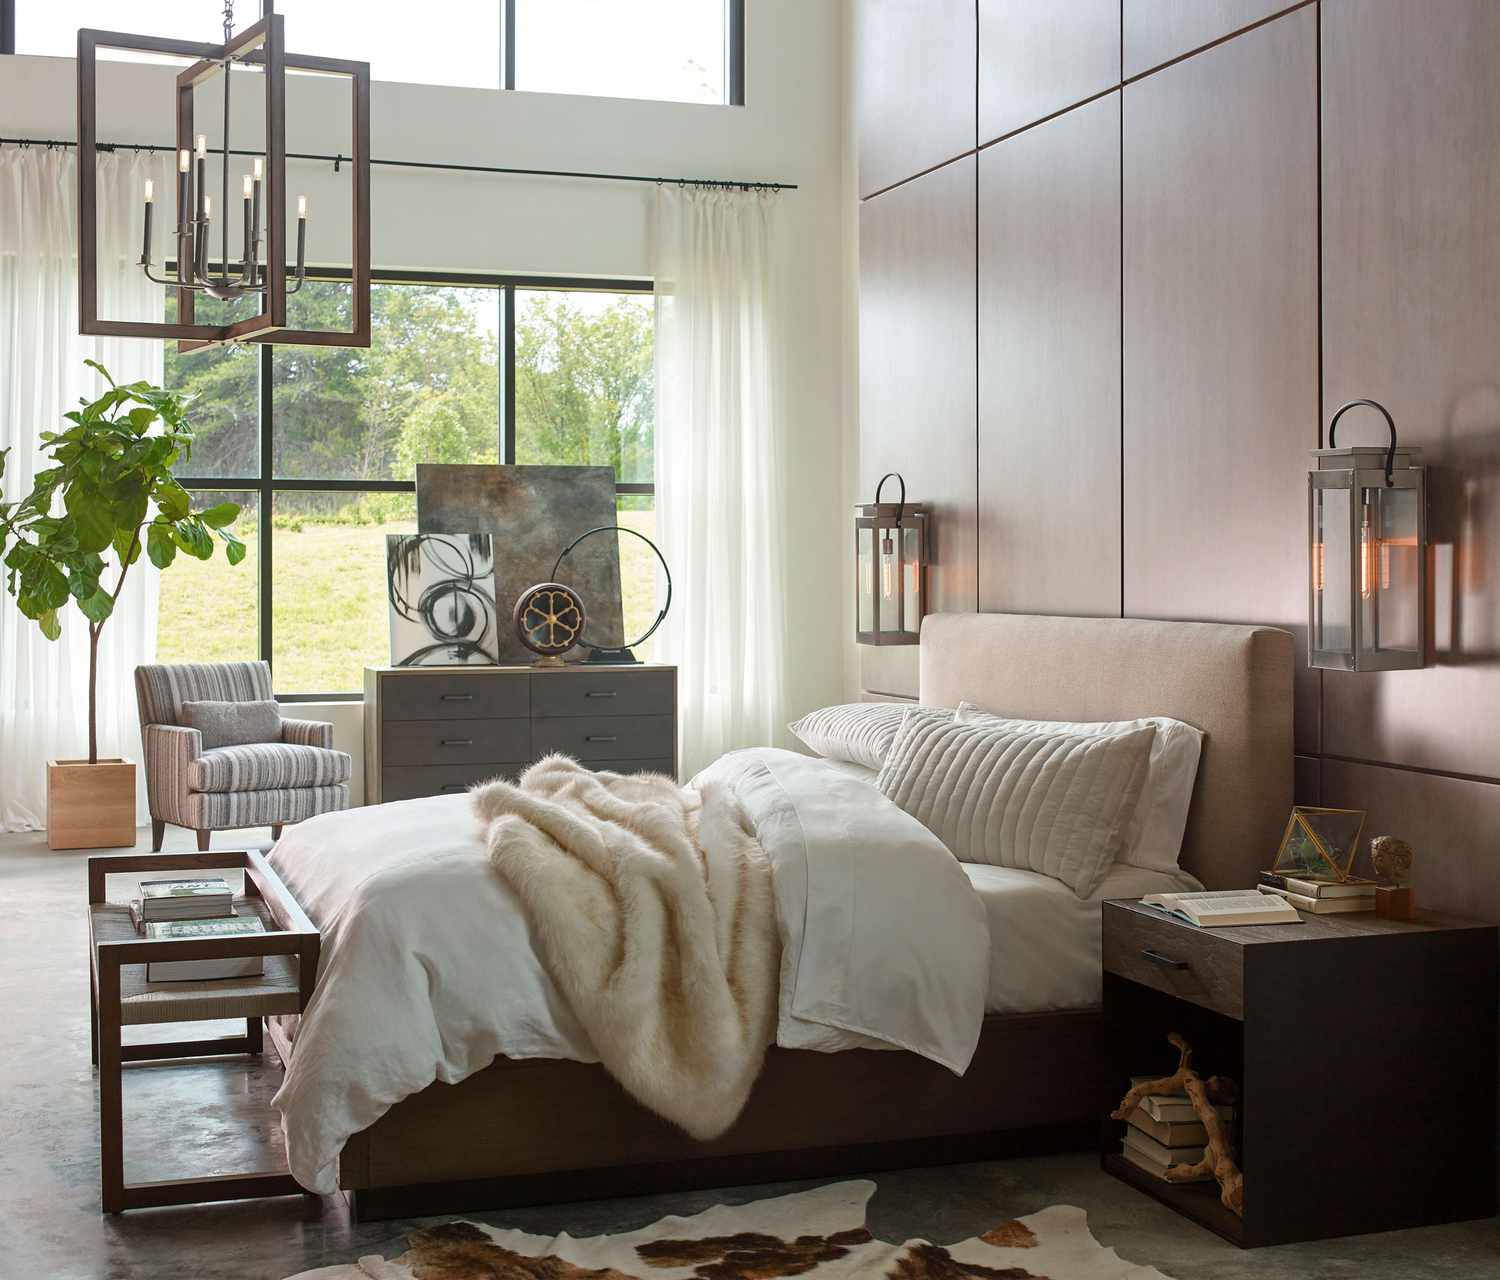 neutral tones cozy bedroom with mounted sconces